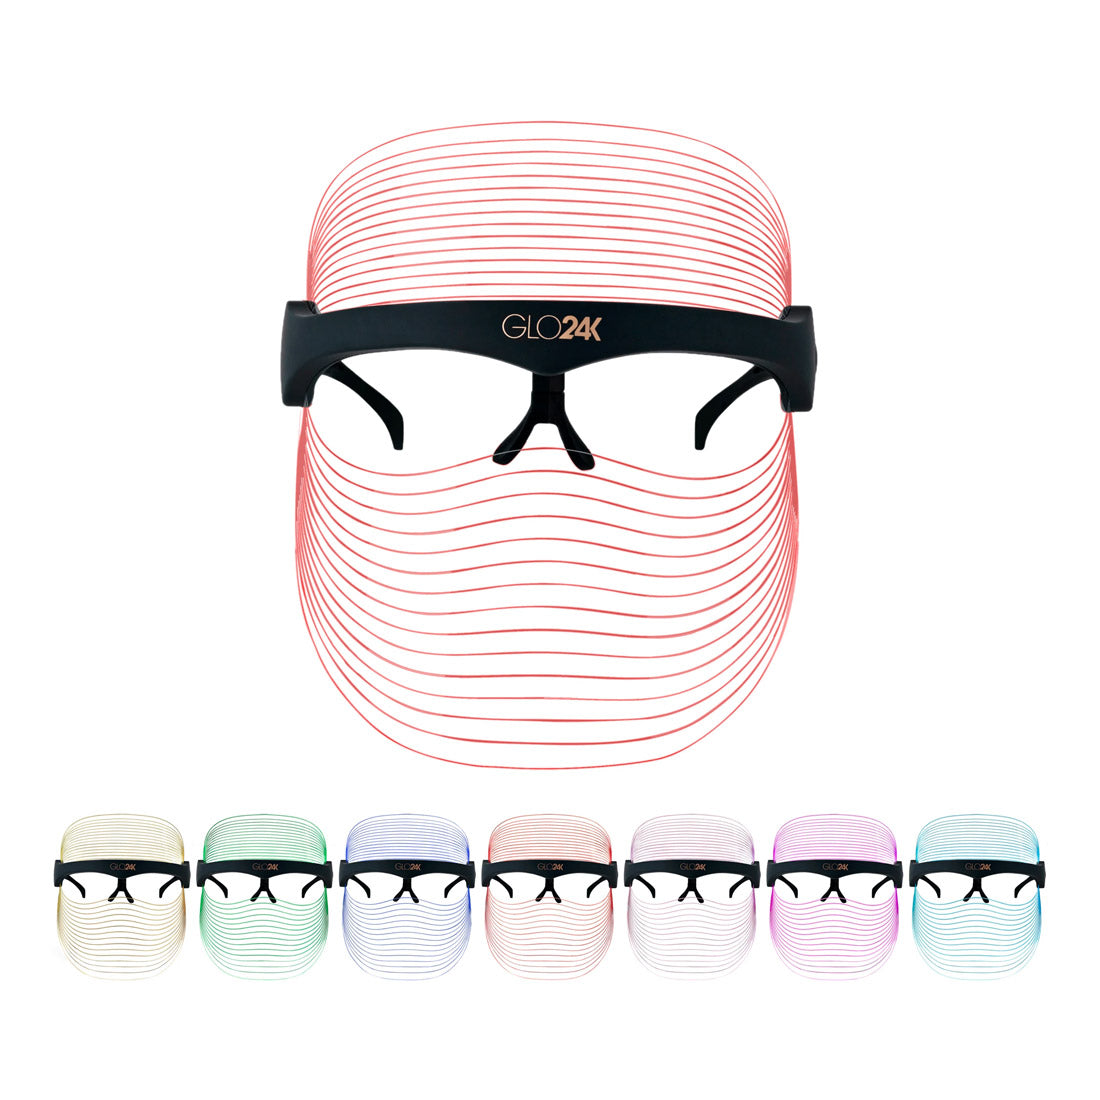 LED Face Mask, showing all 7 Colours. Red, Yellow, Green, Blue, Pink, Clear Blue, Purple, White